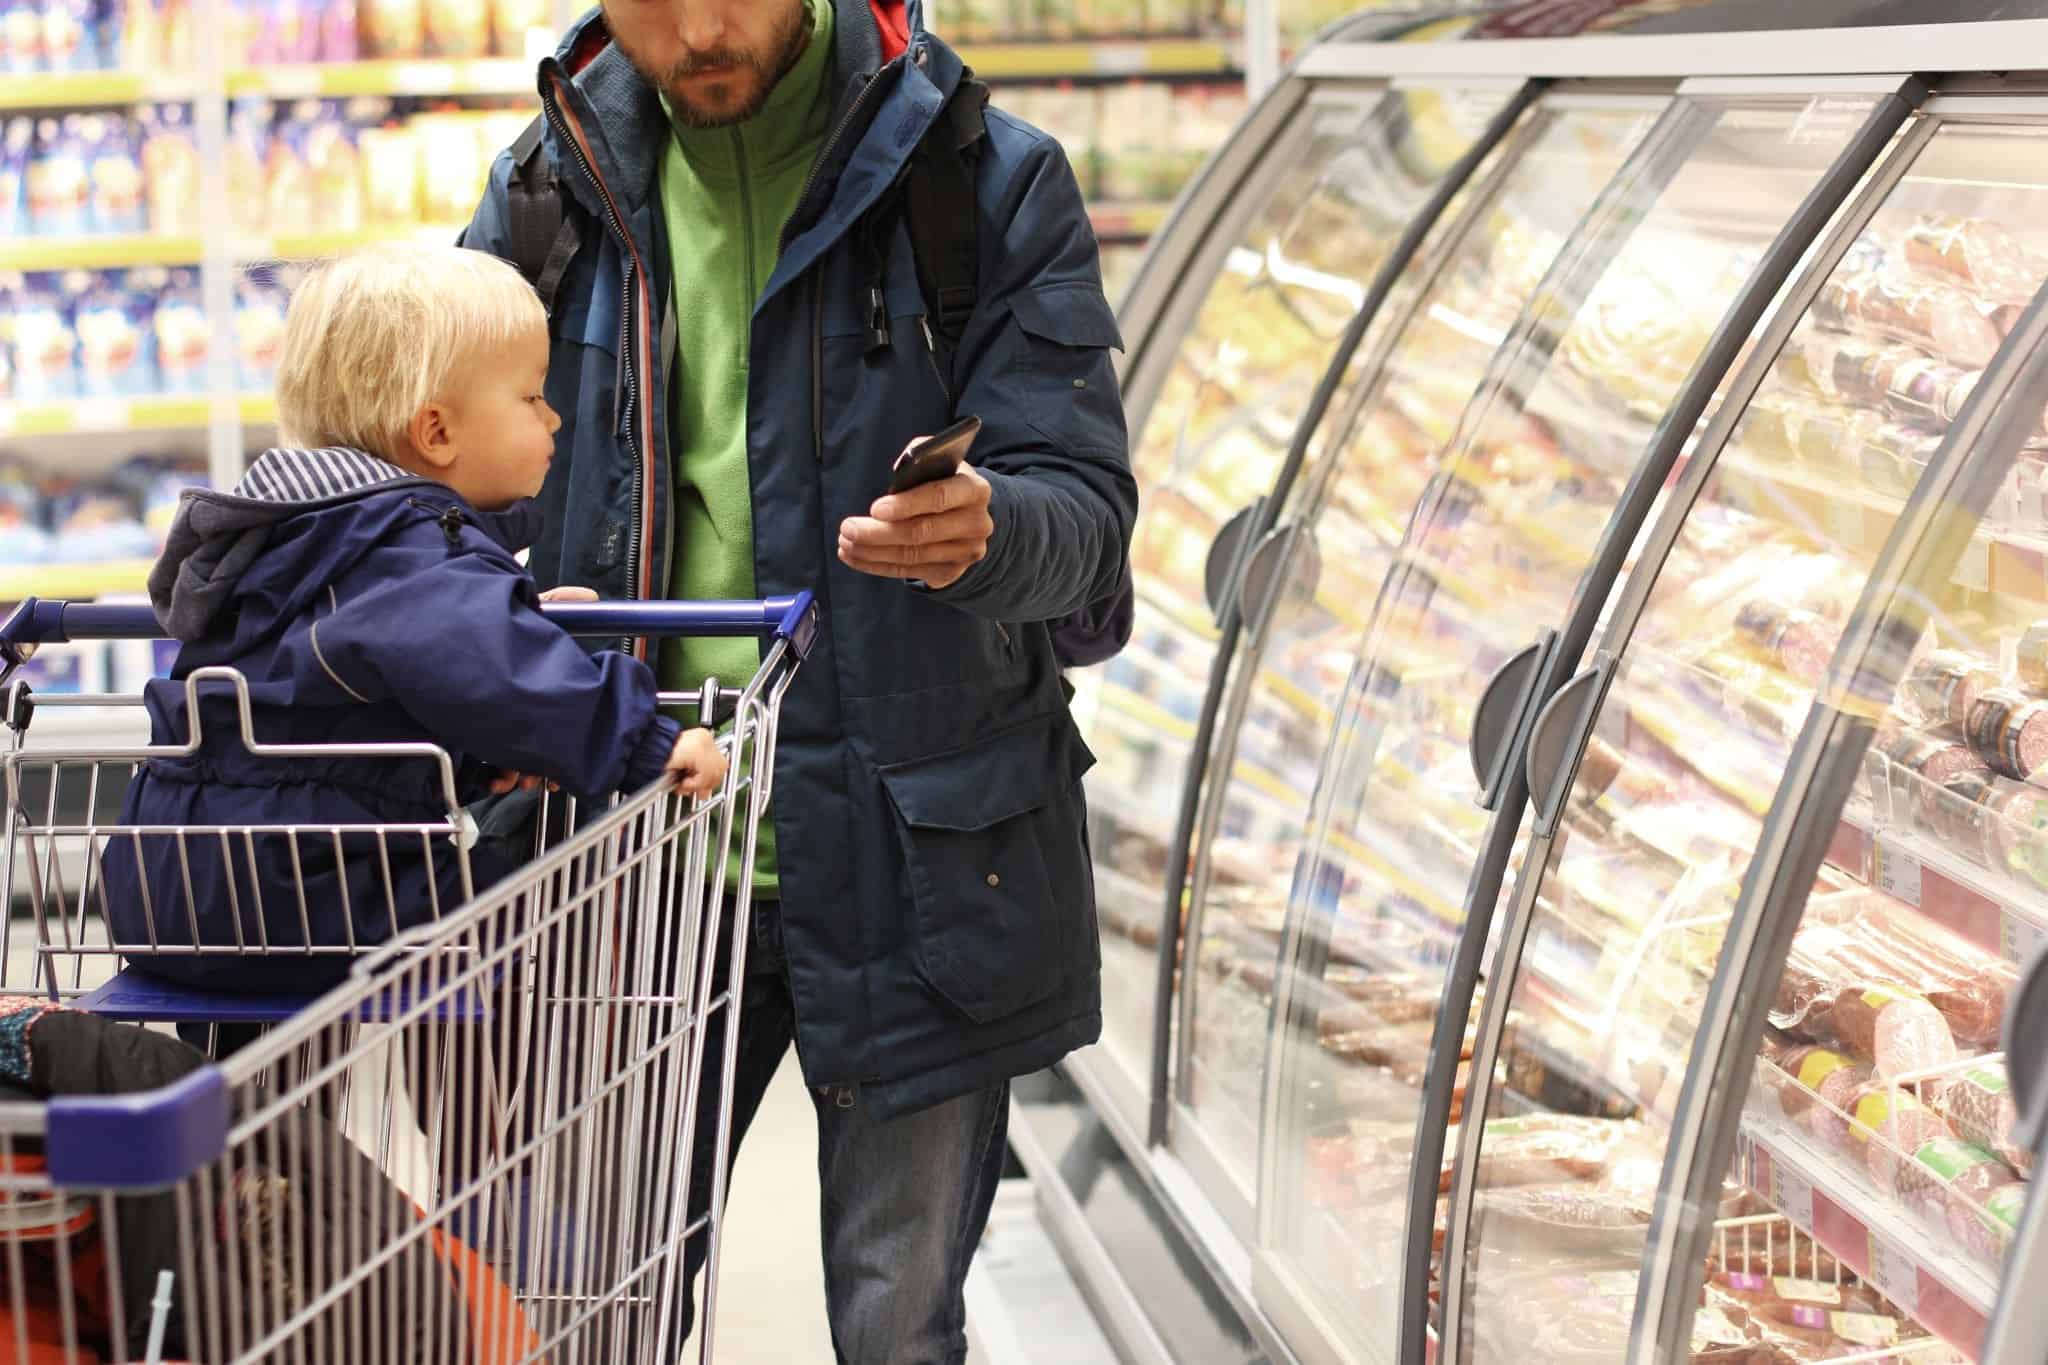 Man with child at the supermarket does the math on rising prices